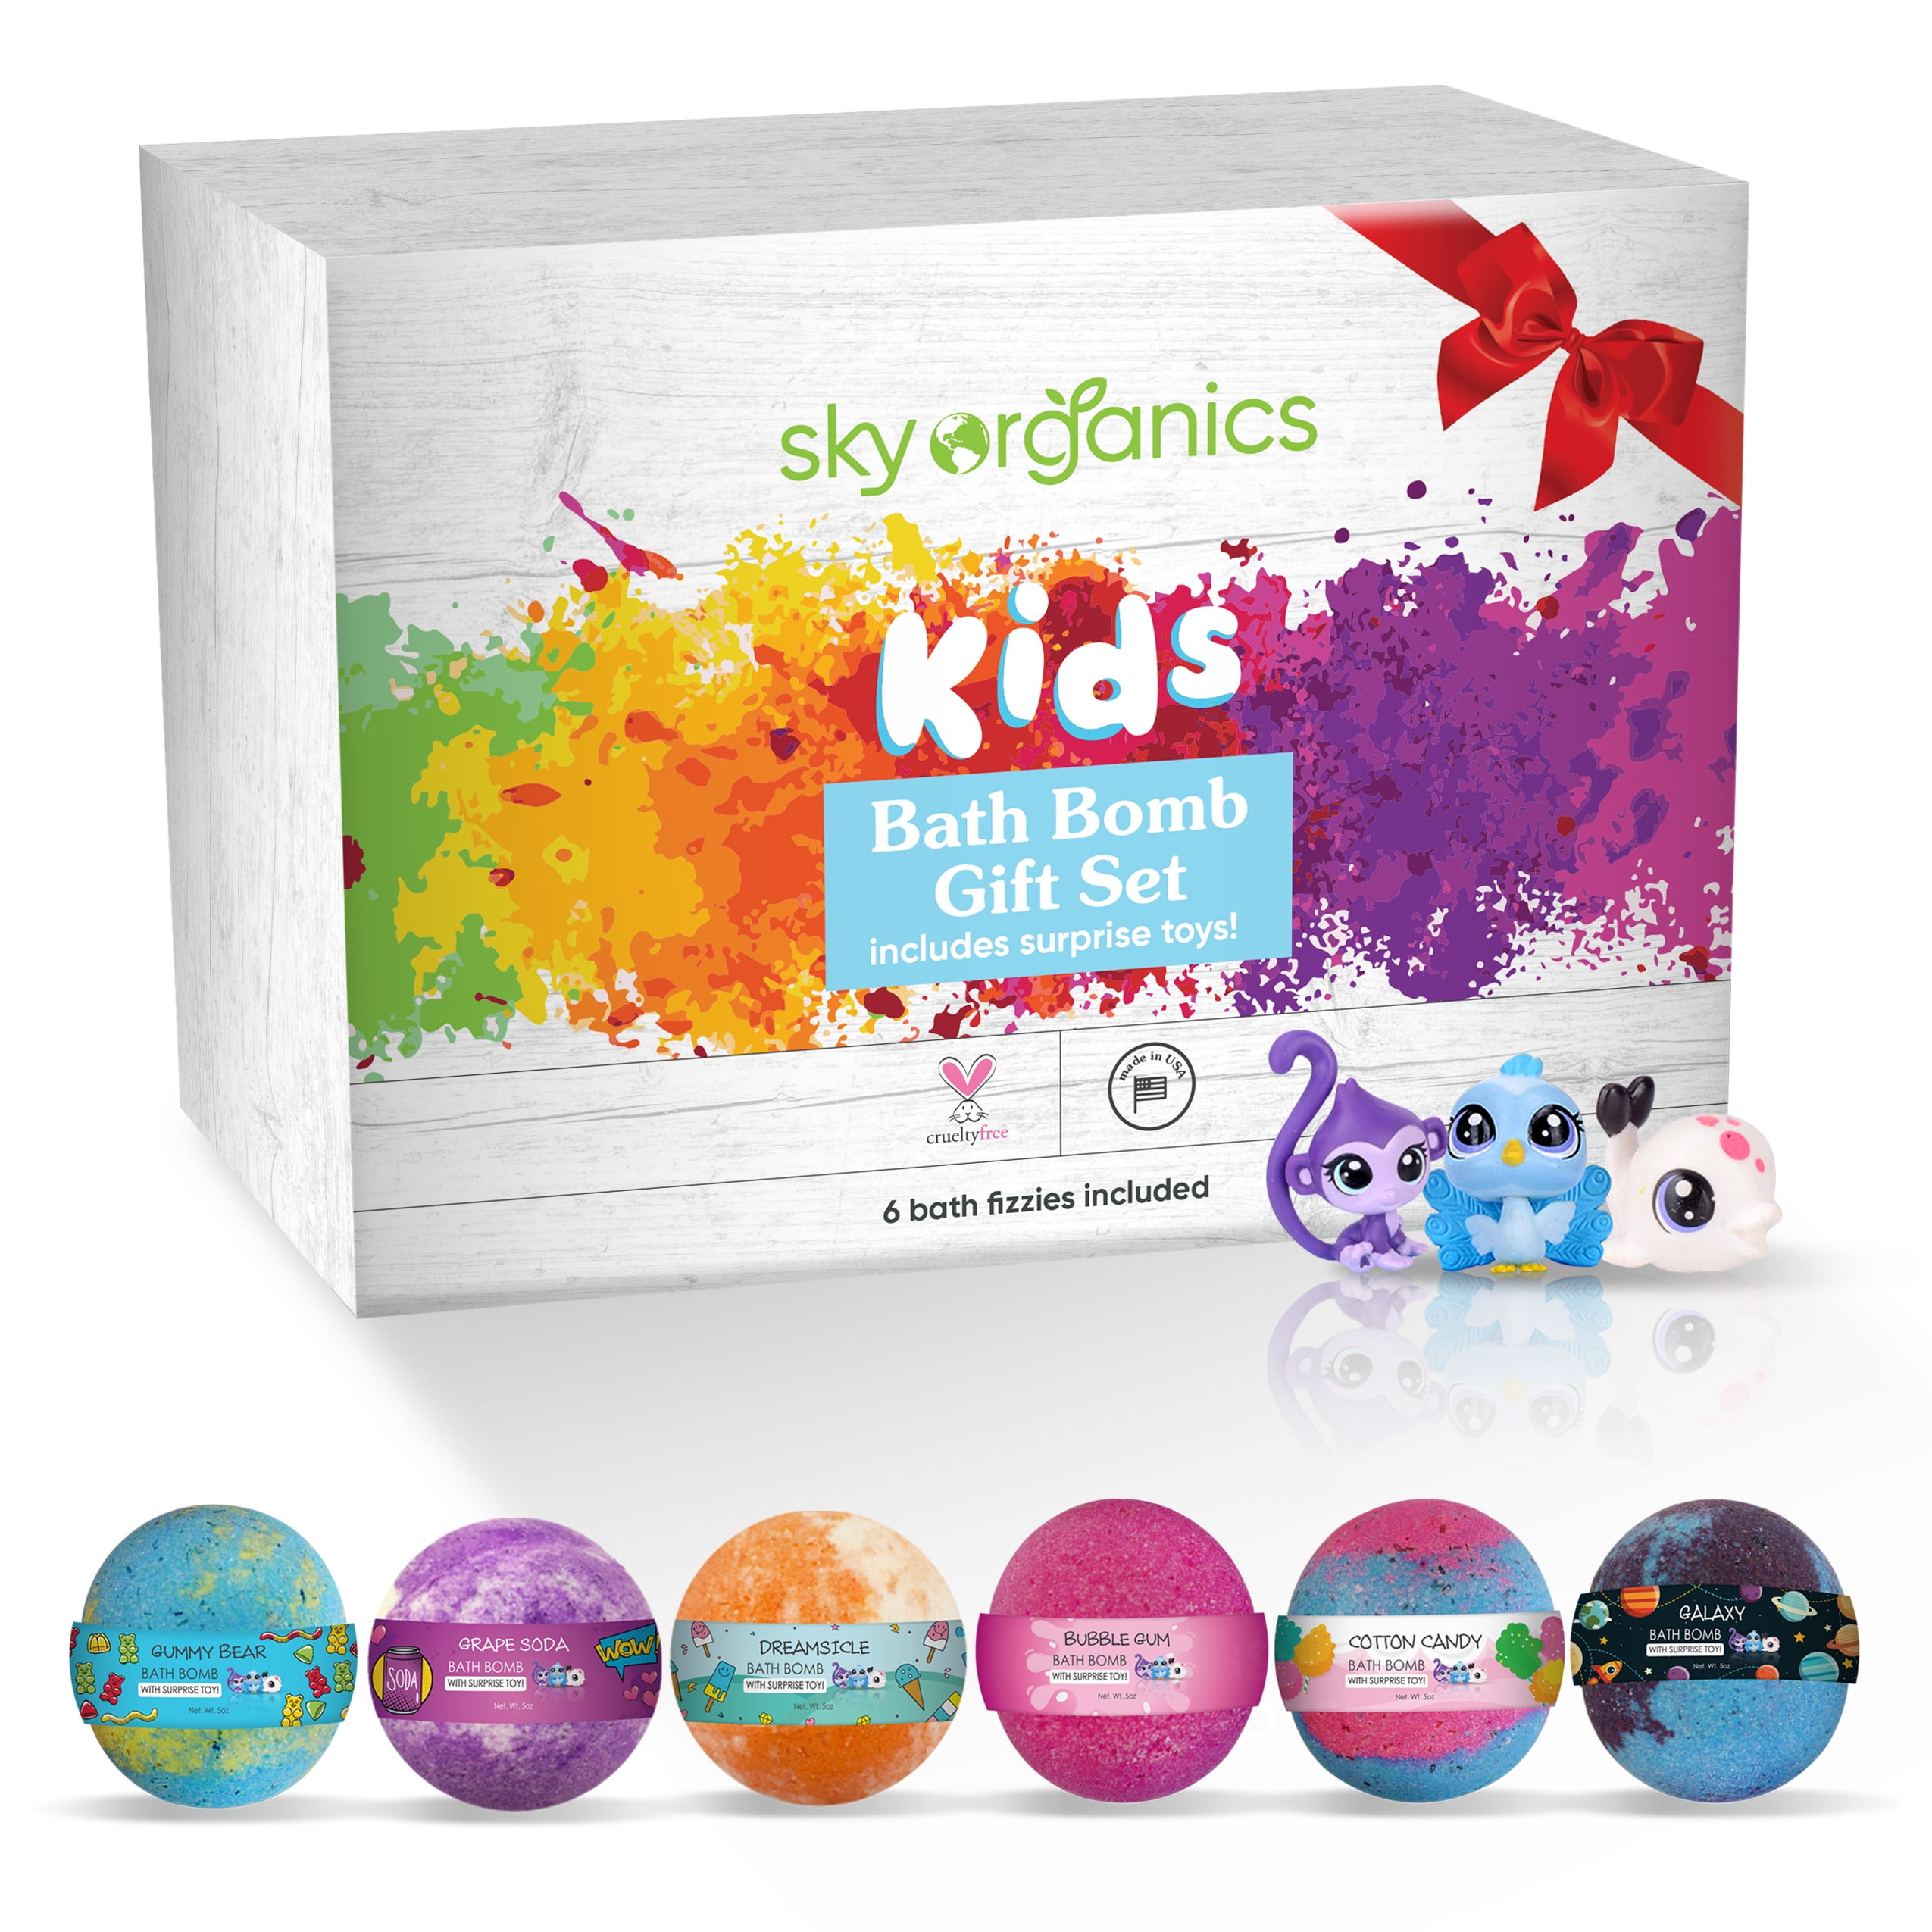 Sky Organics Kids Bath Bombs Gift Set With Surprise Toys Inside 6 Ct Fun Assorted Colored Jumbo Bath Fizzies Kid Friendly Gender Neutral Bath Bombs Made In The Usa Bubble Bath Fizzy Set